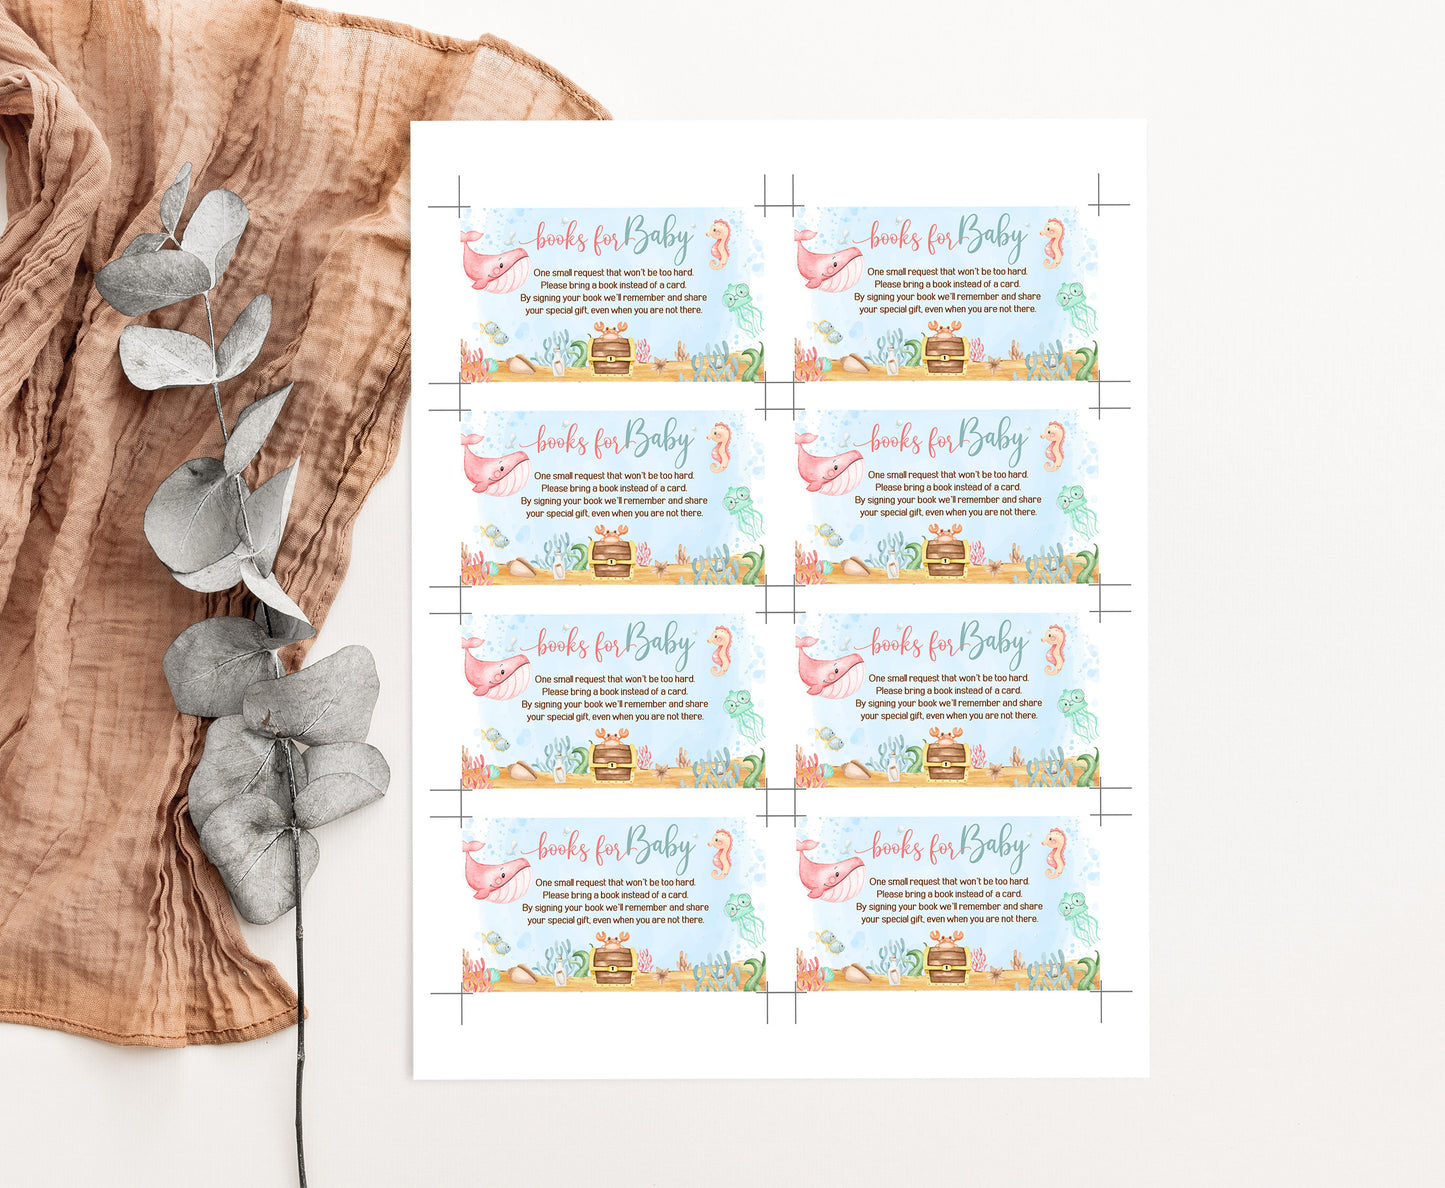 Under The Sea Books For Baby Request Card | Girl Ocean Baby Shower Invitation insert - 44A